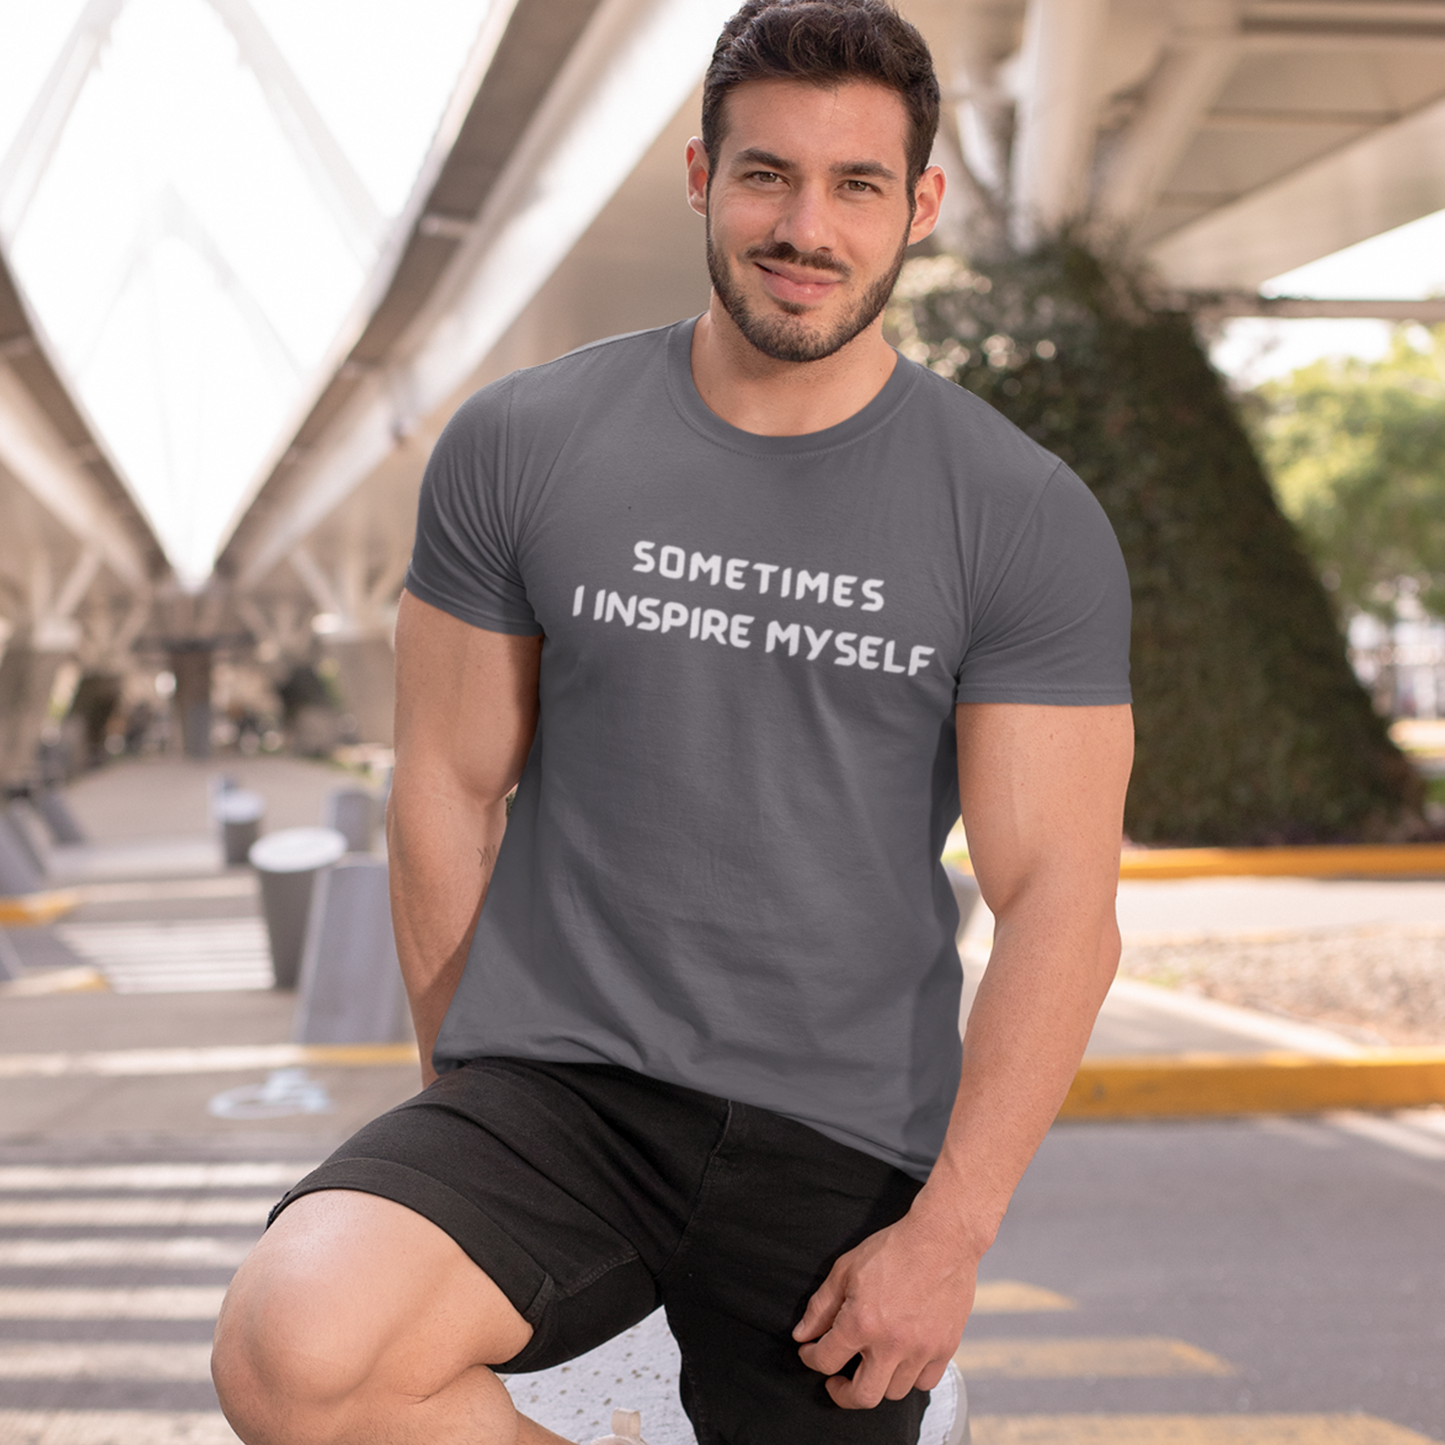 Sometimes I inspire myself unisex t shirt gift, t shirt gift with meaningful words,